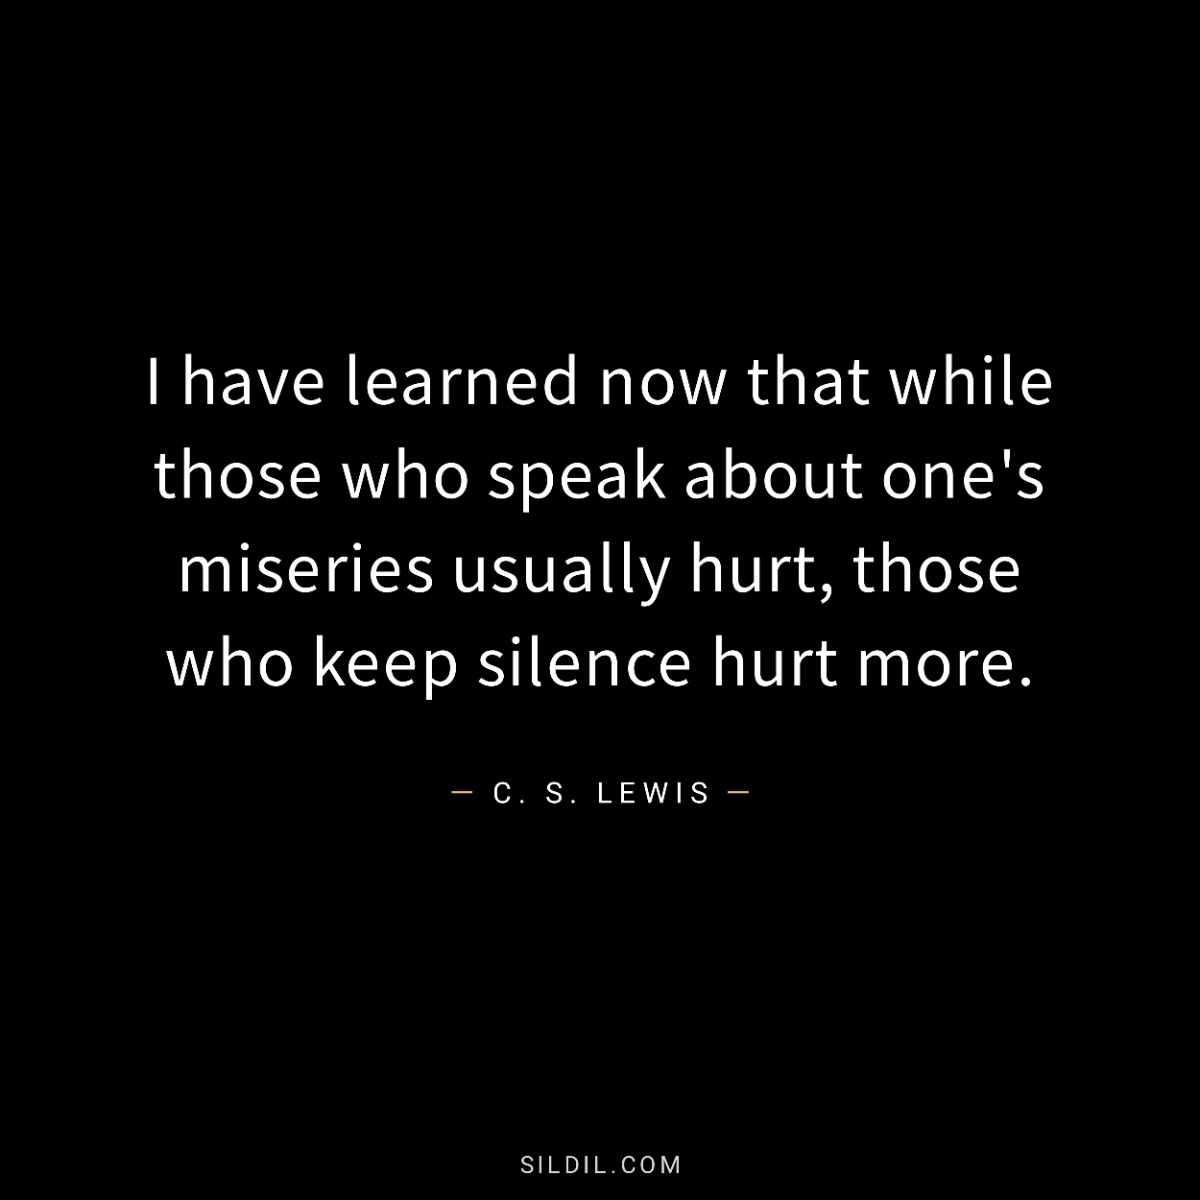 I have learned now that while those who speak about one's miseries usually hurt, those who keep silence hurt more.